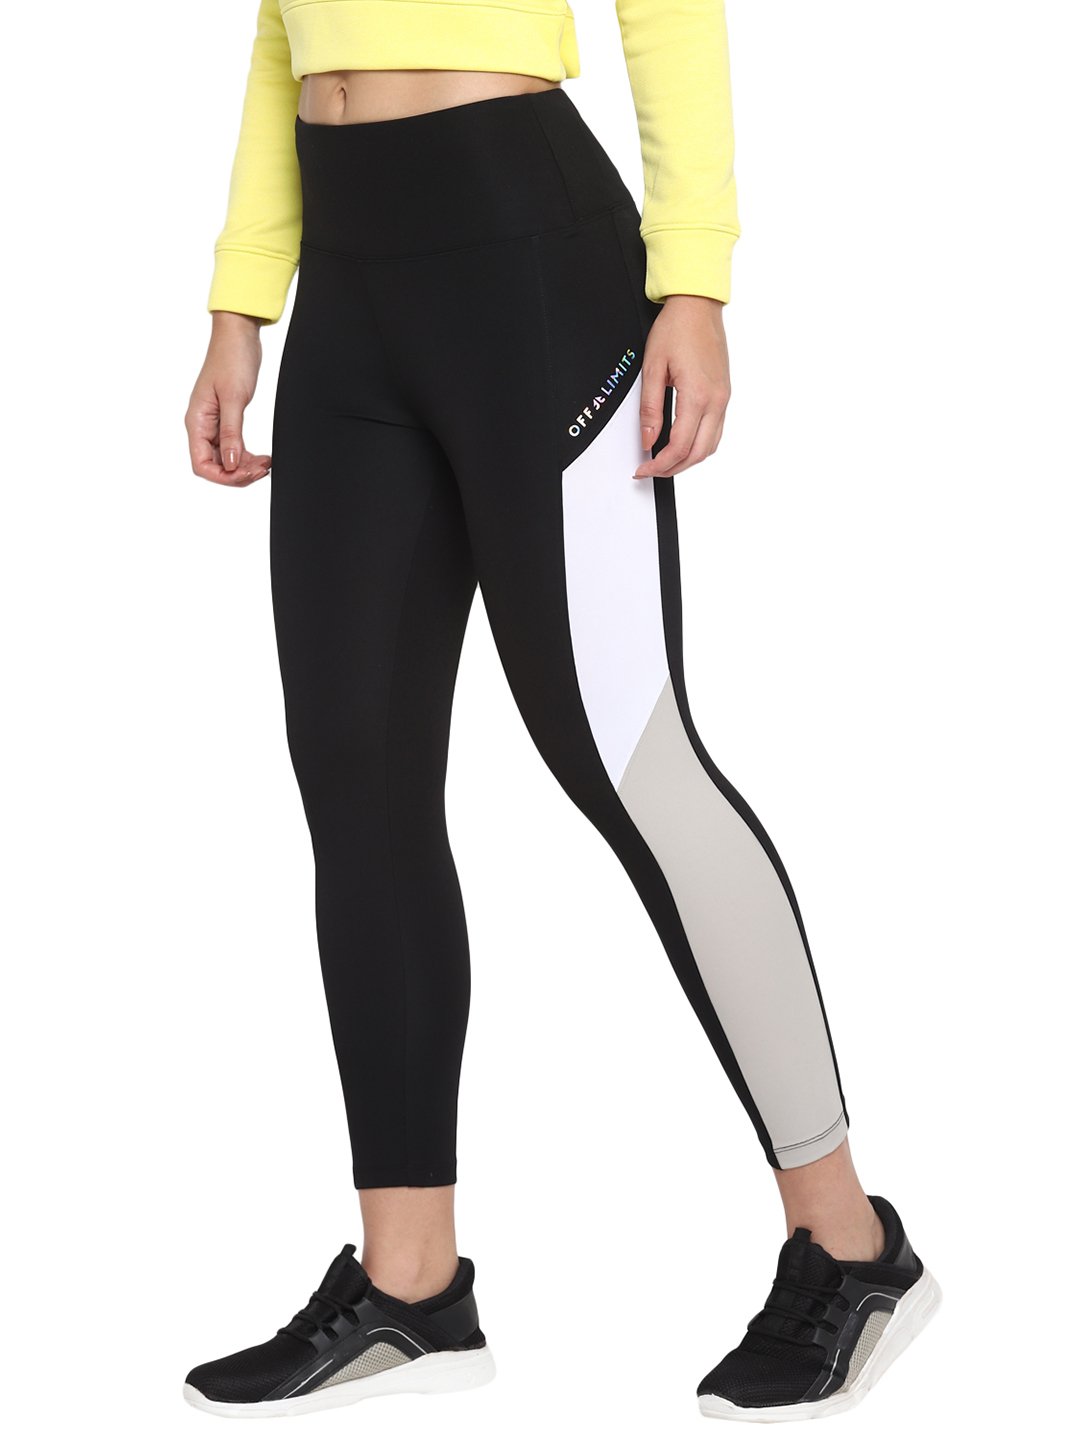 WMN PS CNS 2 TIGHTS Women Tights